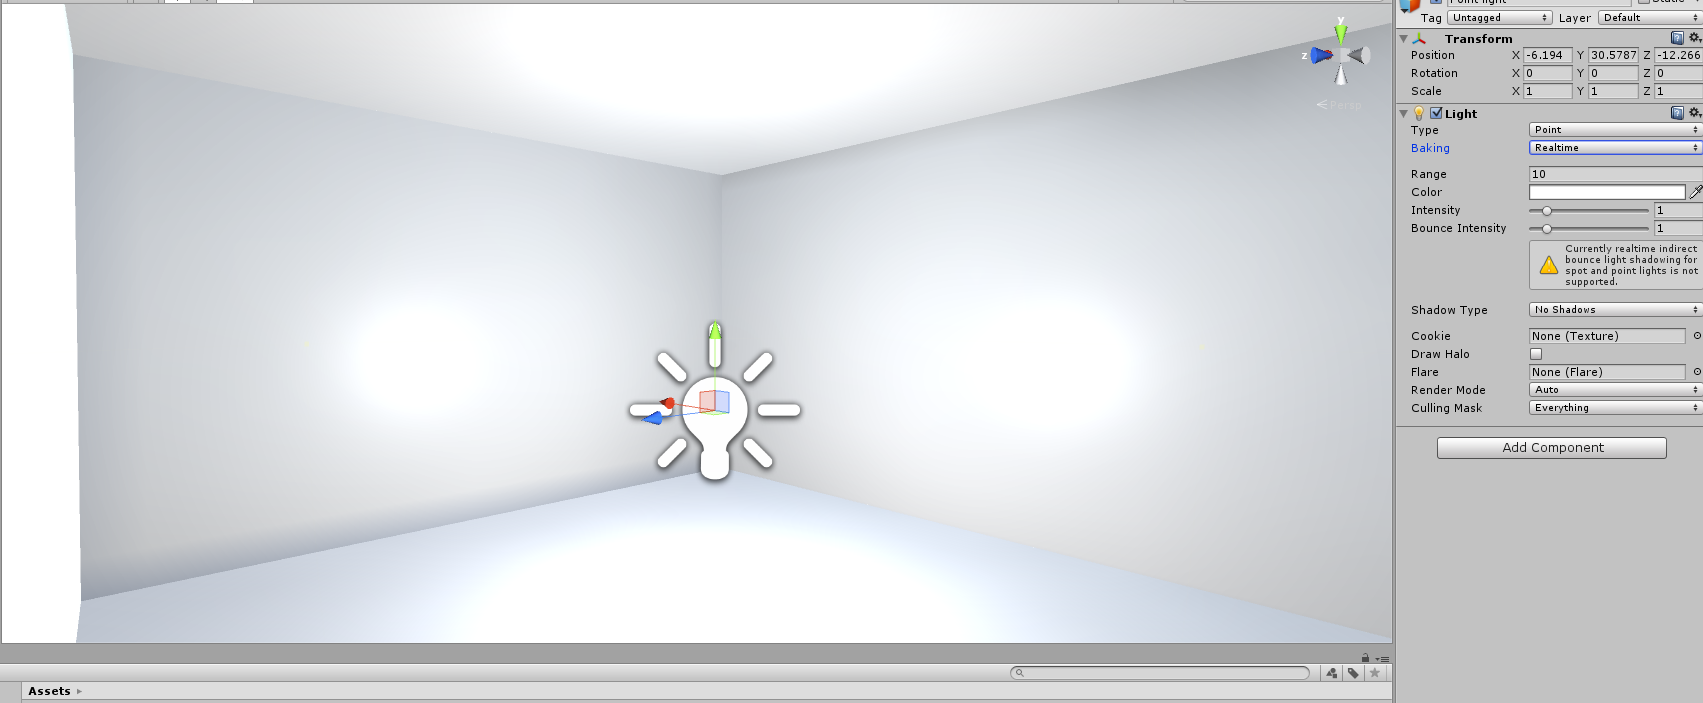 SOLVED] Lightmapping not working with Lights - Unity Forum